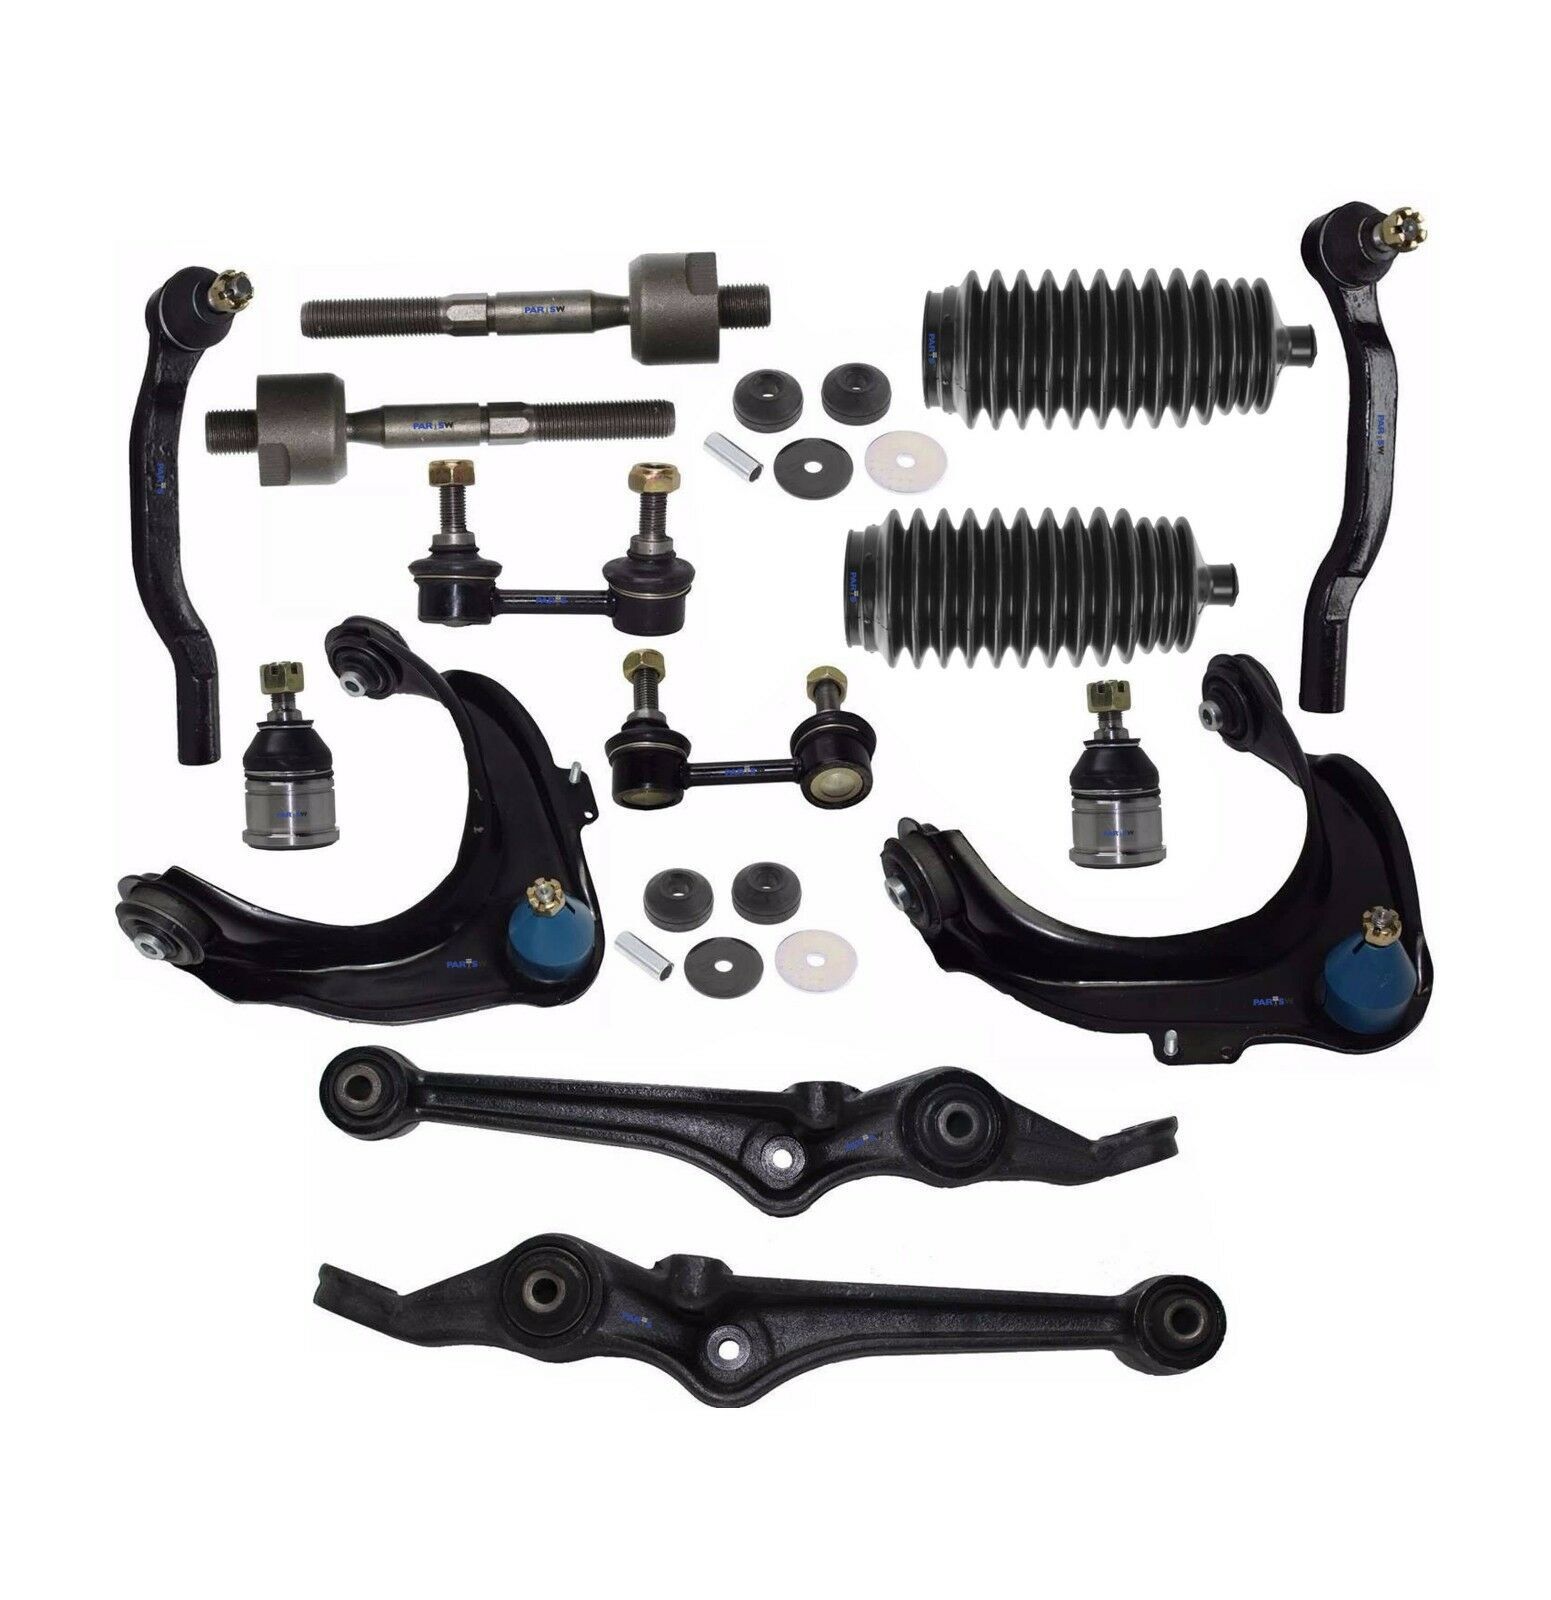 16 Pc Suspension Kit for Honda Accord Upper & Lower Control Arms, Sway Bar Link